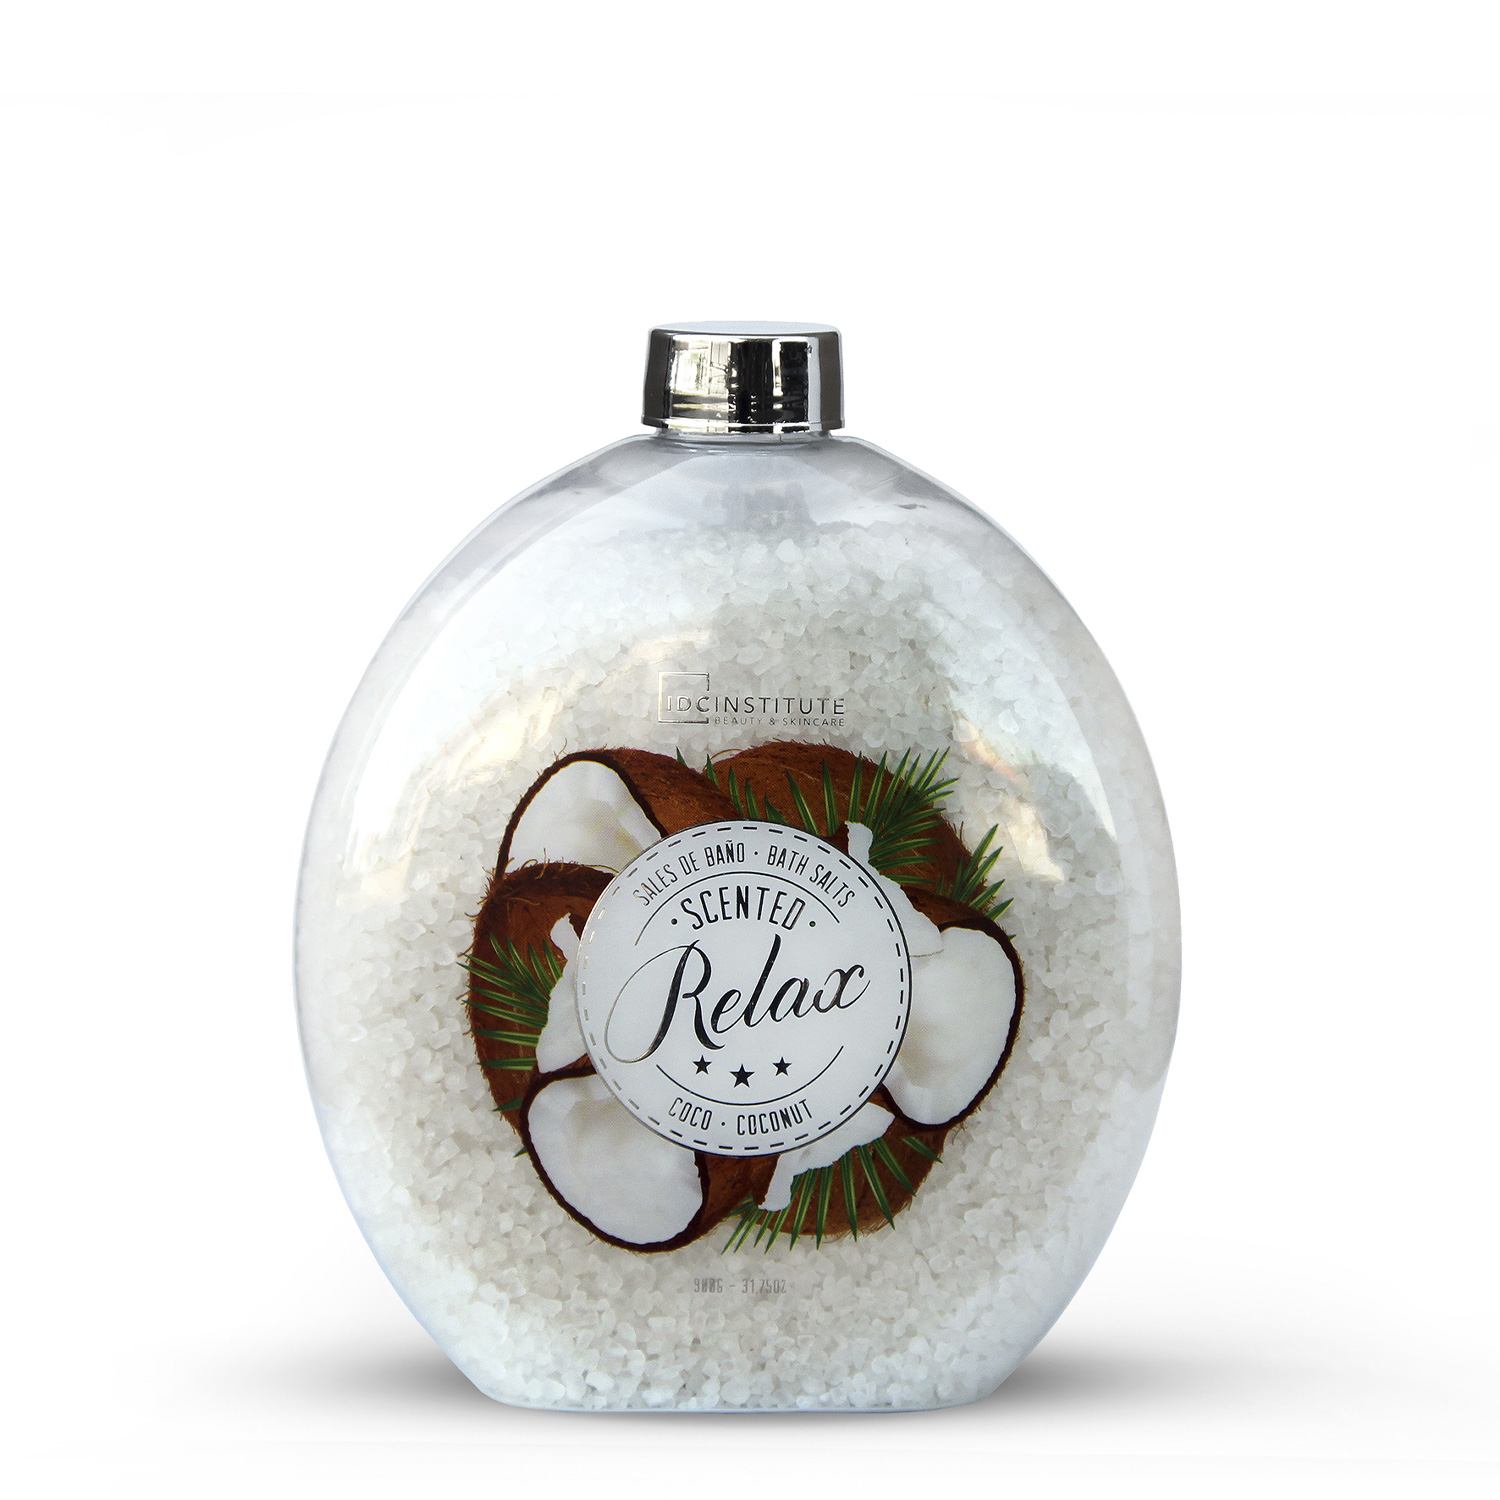 Scented Relax coco